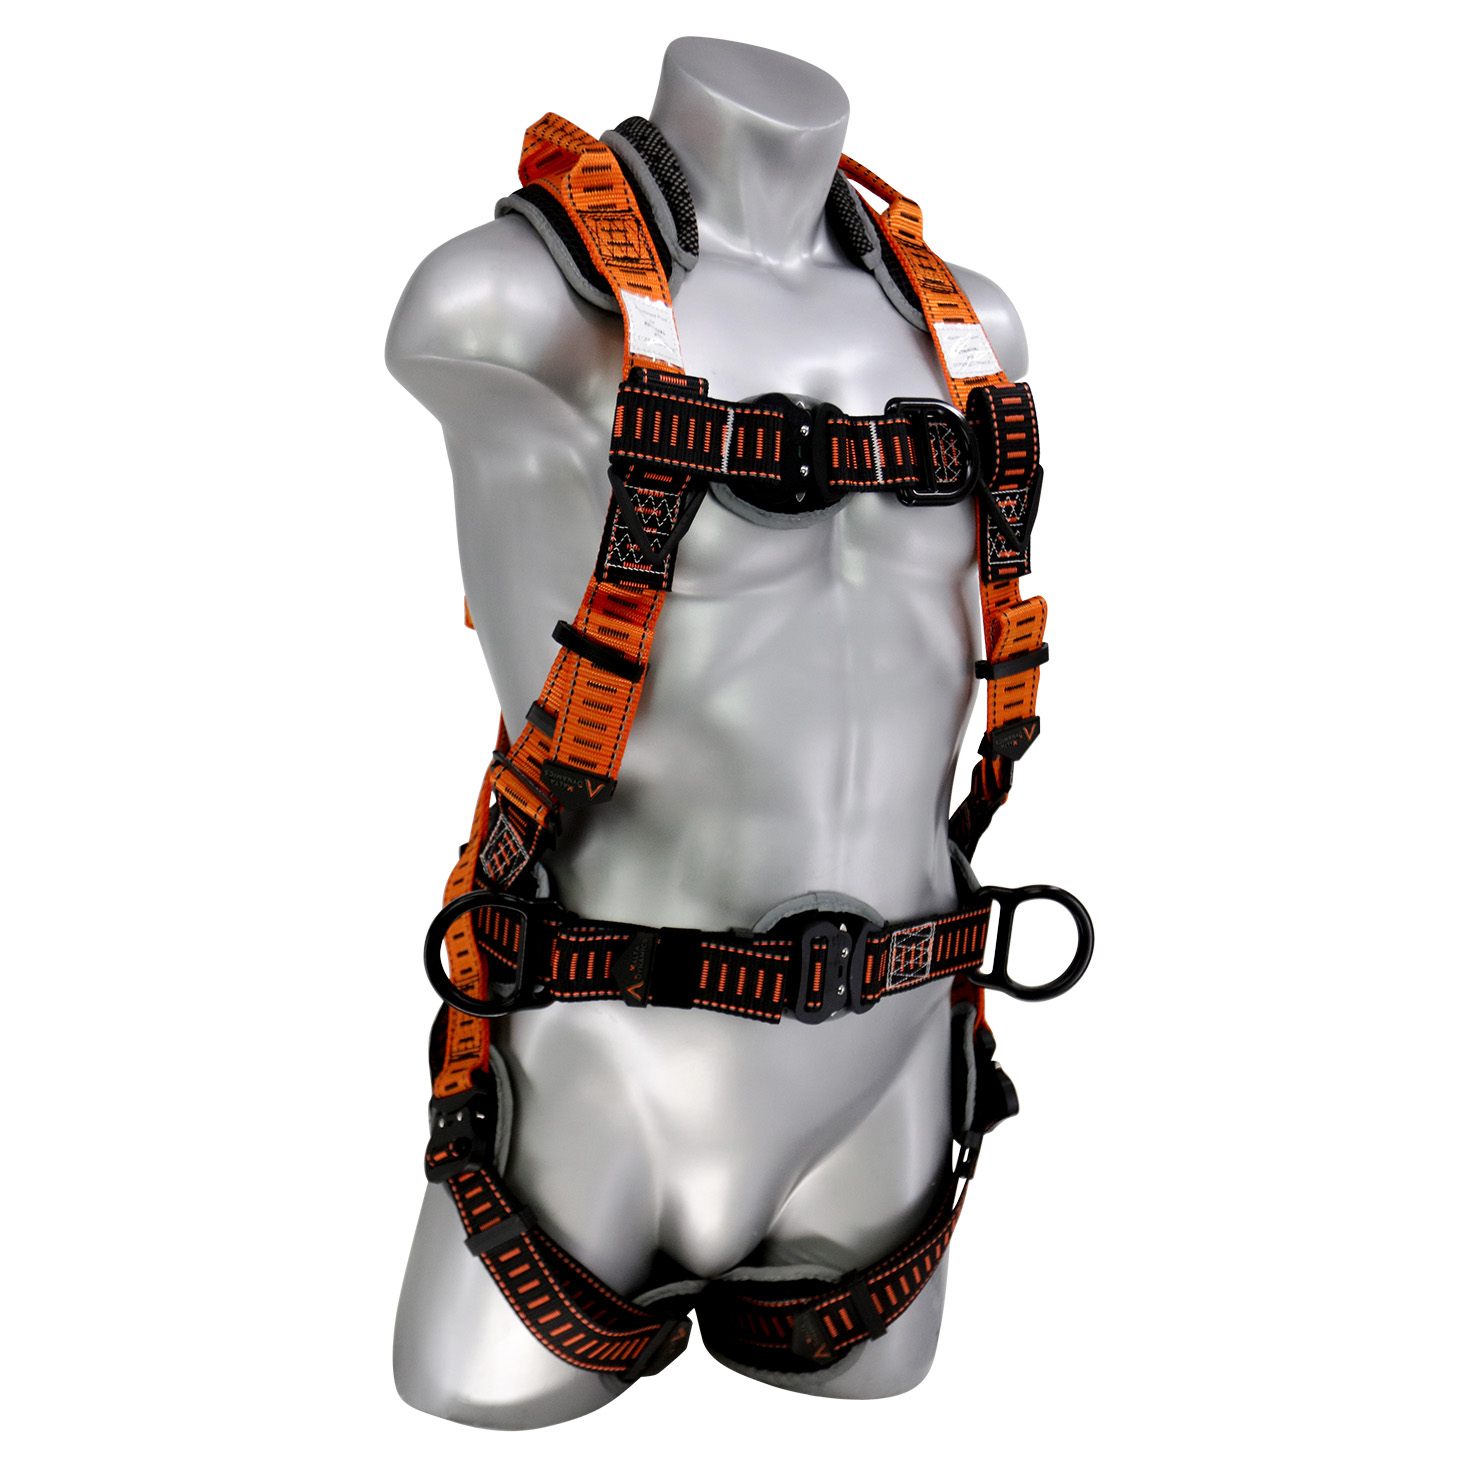 Reliance Model 885050 3-D Ring Saddle Safety Harness Padded Seat 